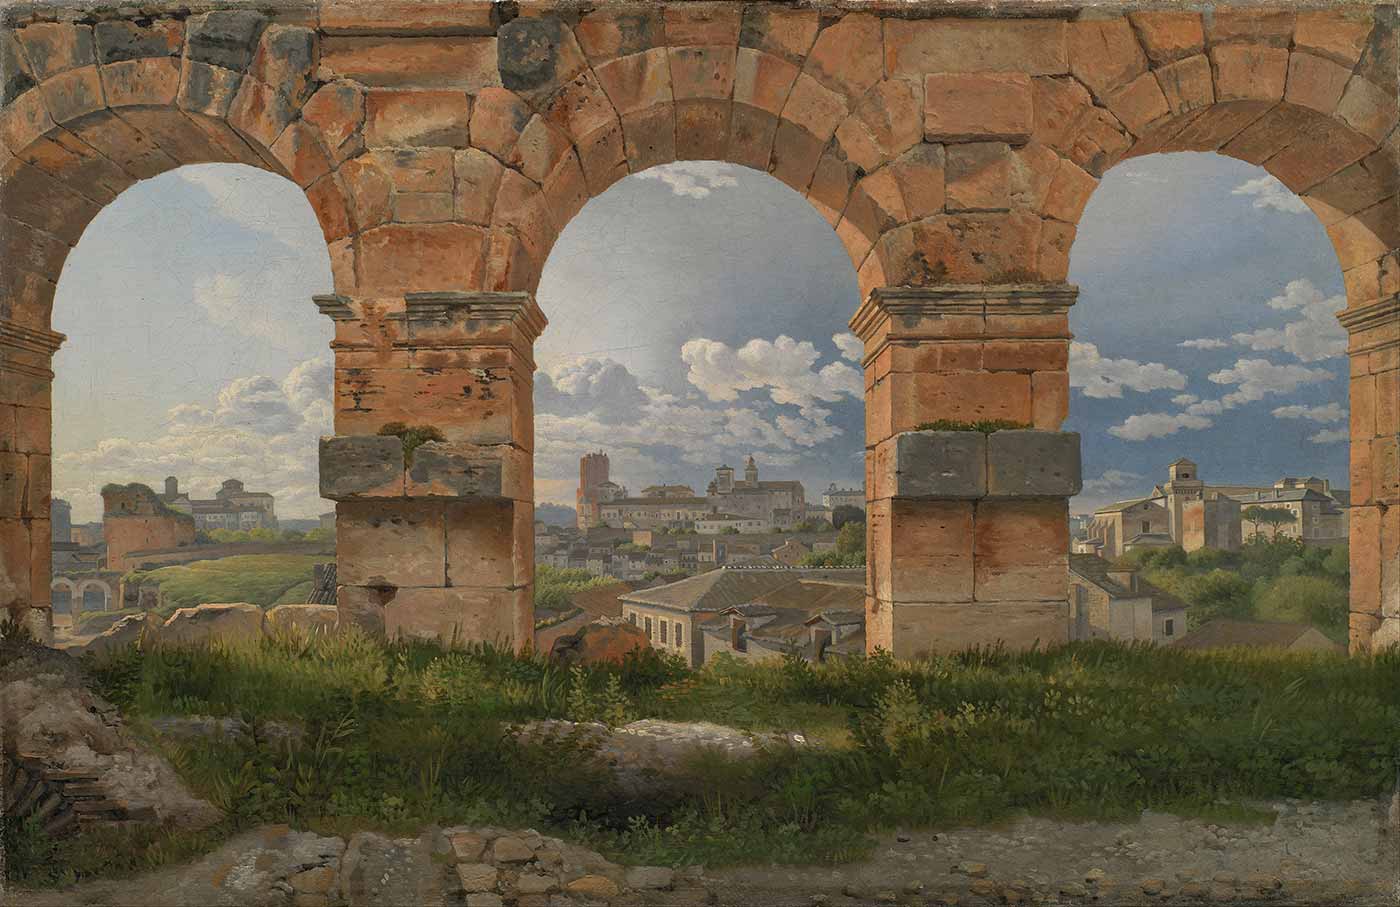 "A View Through Three Arches of the Third Storey of the Colosseum," by C.W. Eckersberg (1815)